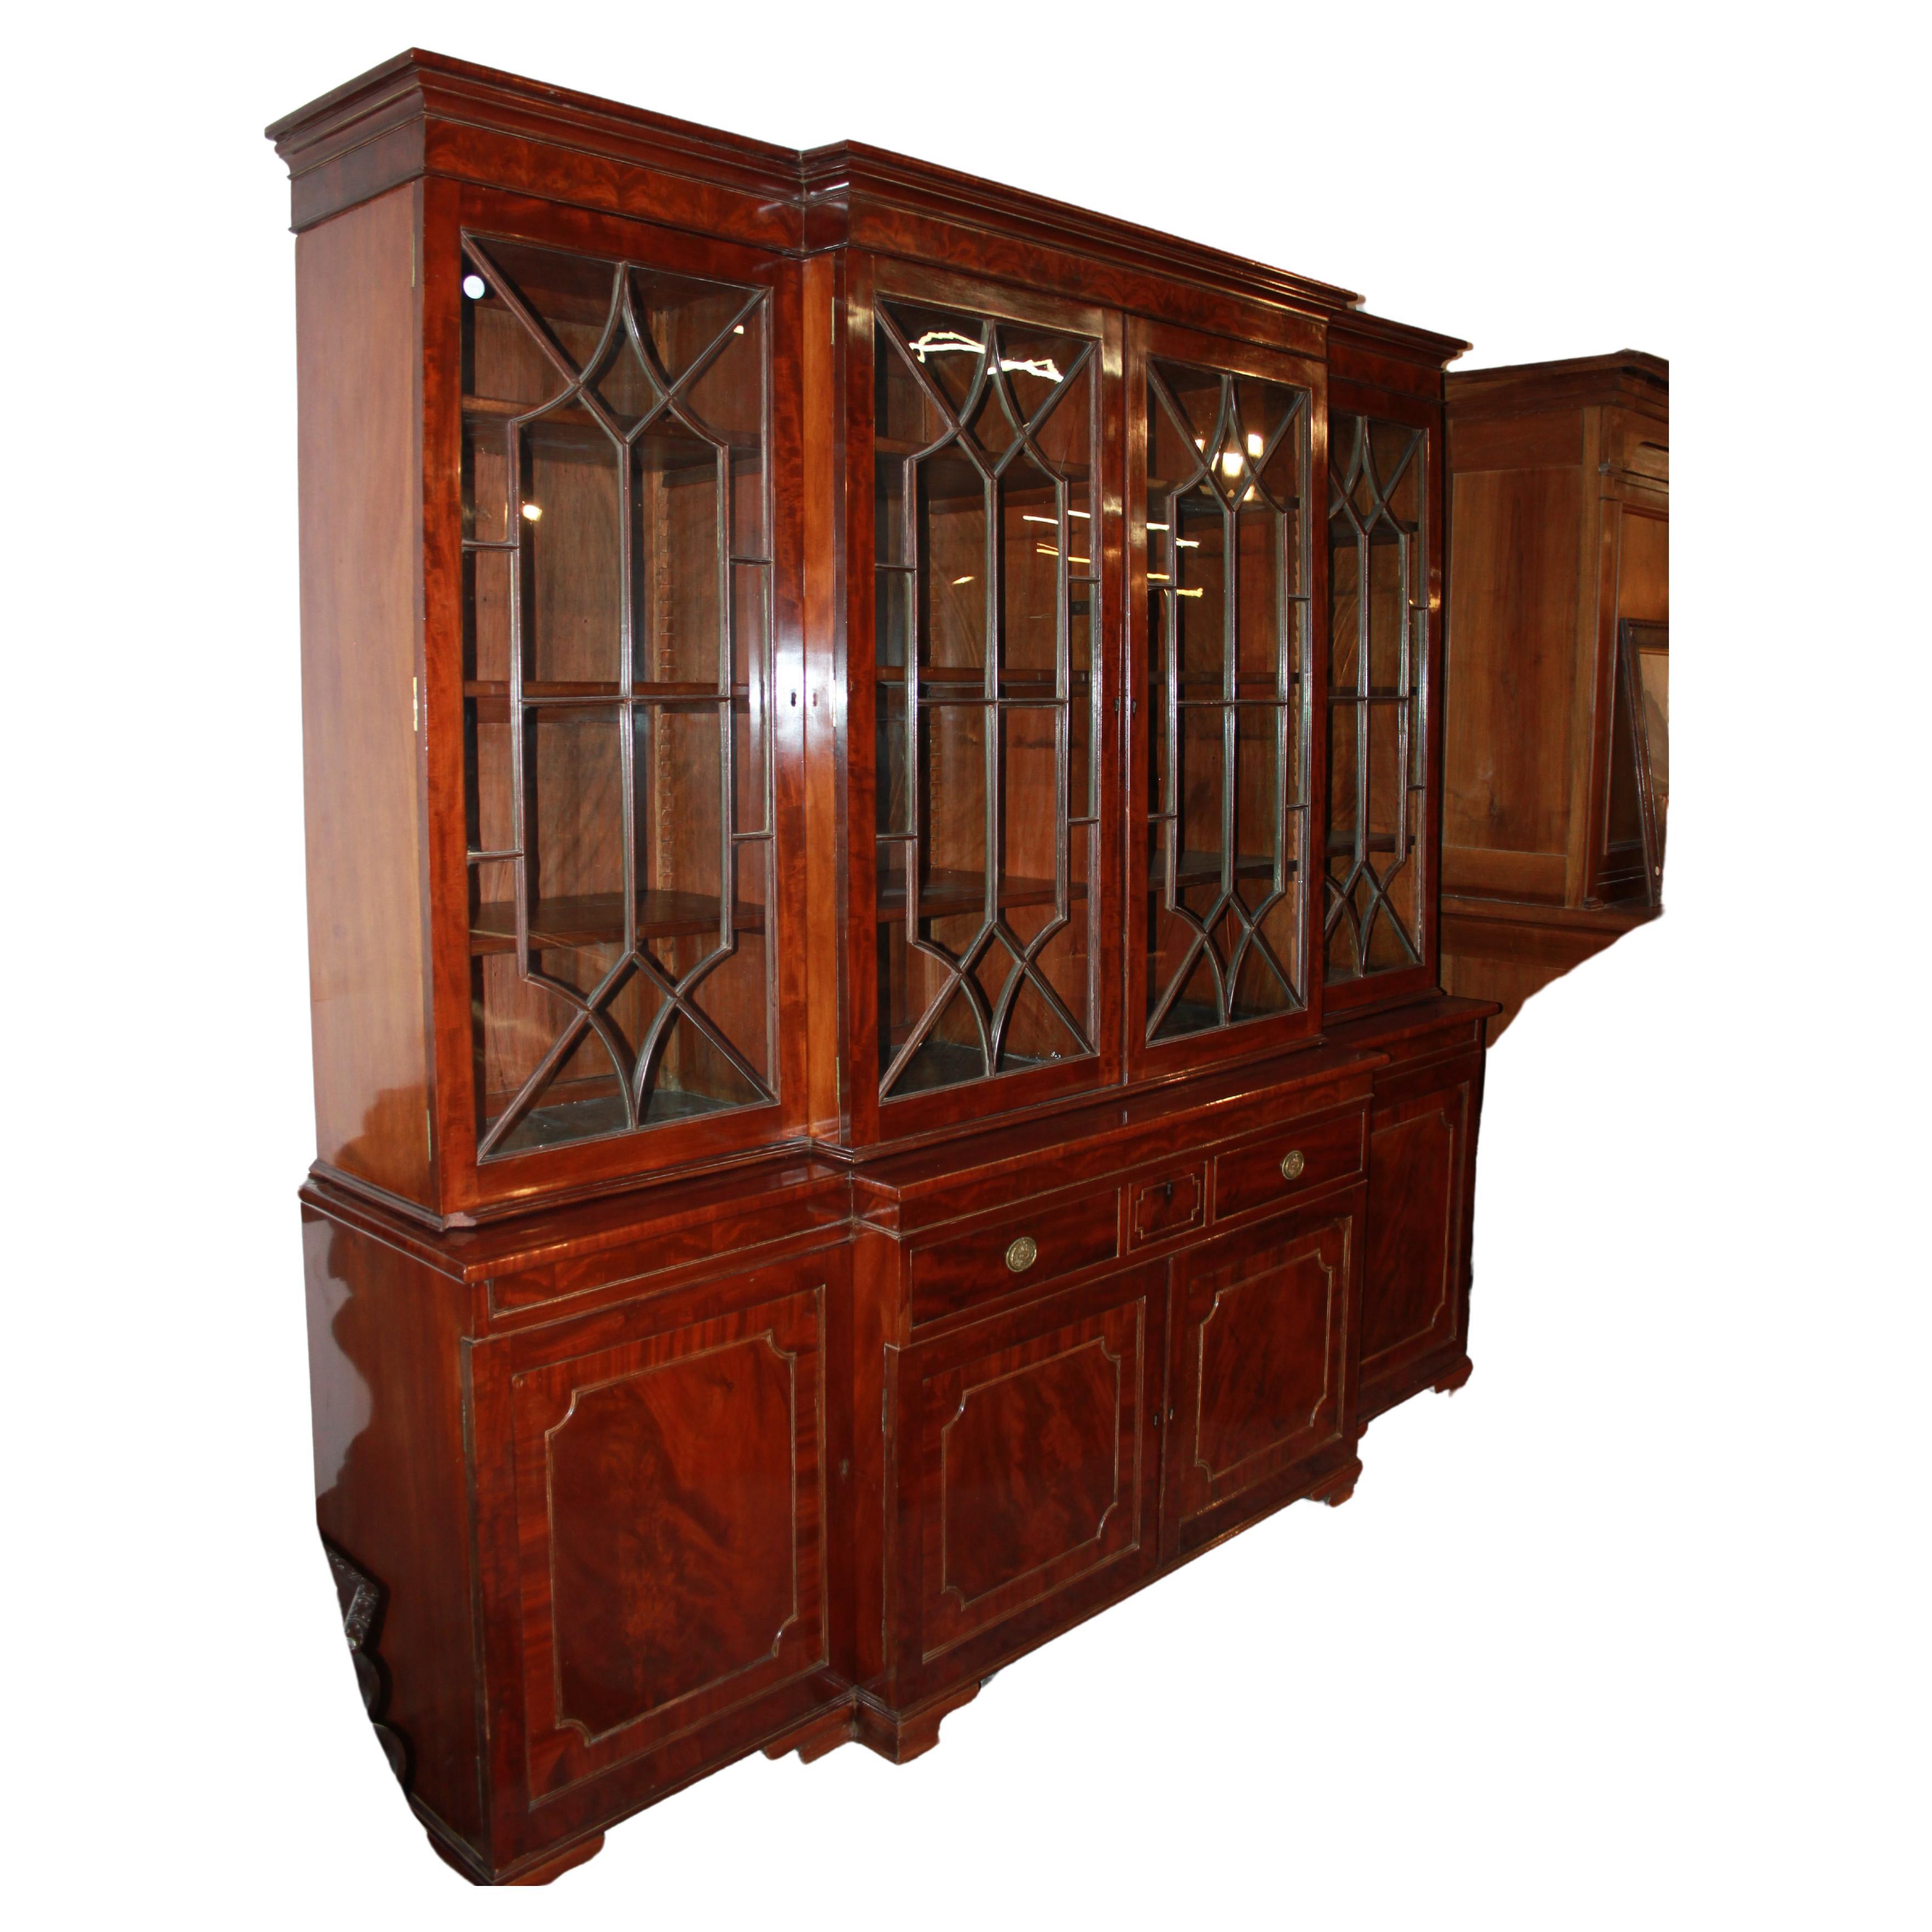 Large 4-door Mahogany English Bookcase from the 1800s Regency era For Sale